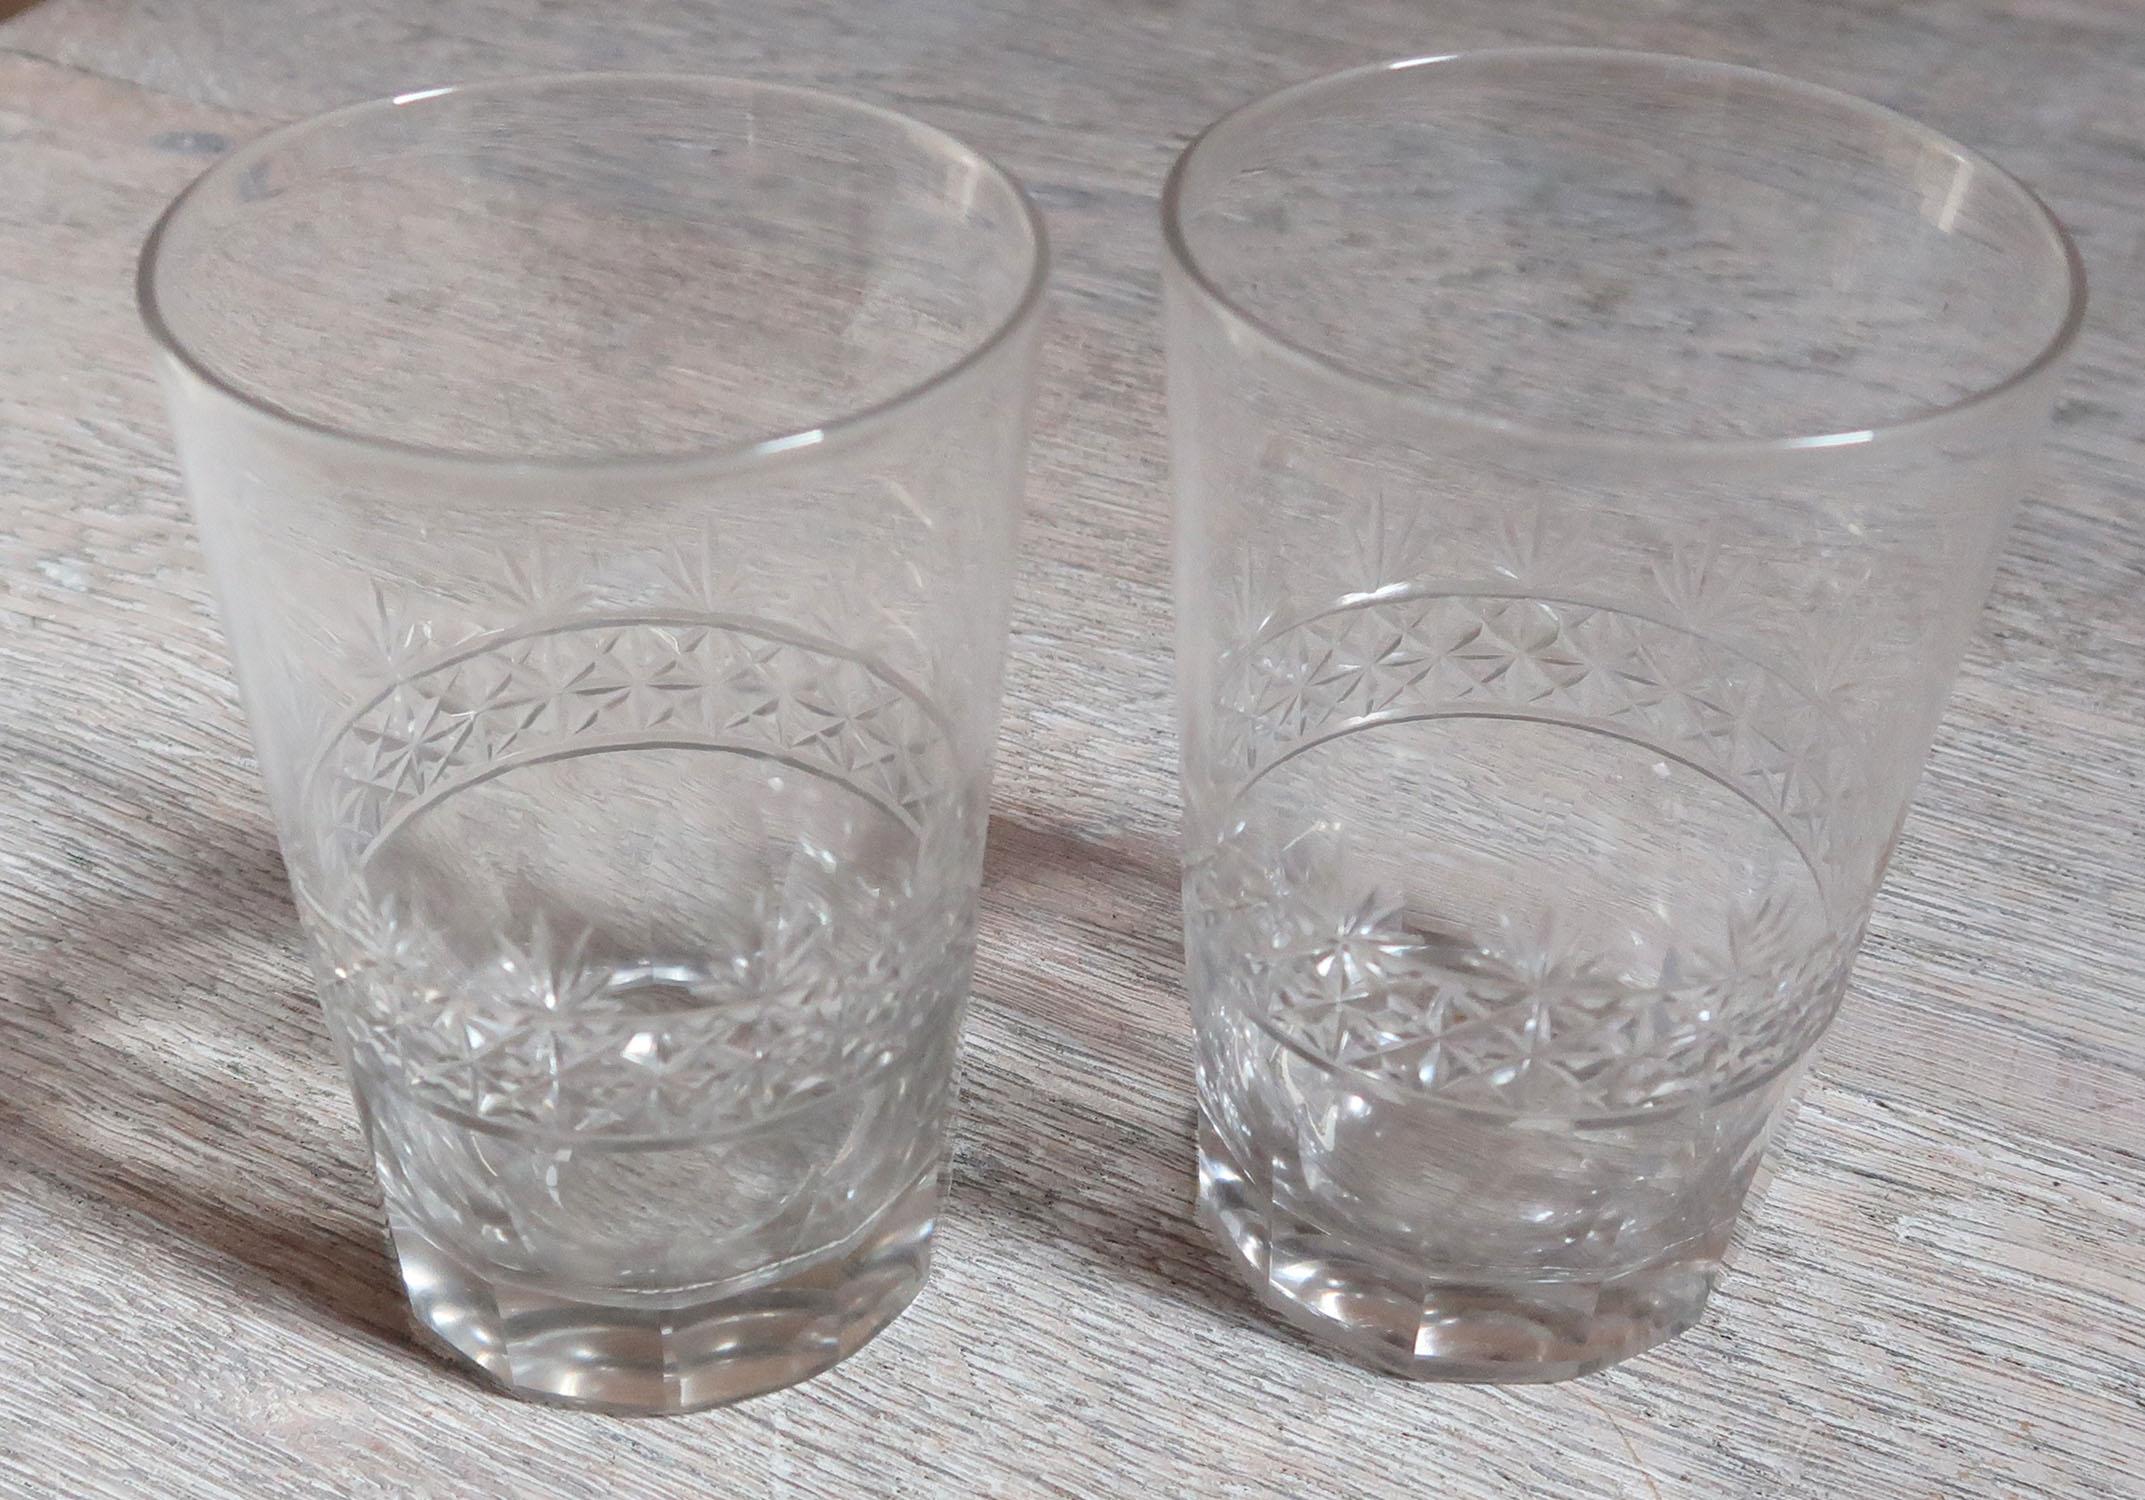 Lovely pair of whisky tumblers

Very pleasant to use

Finely cut and bevelled glass

Unusual size. Smaller than the usual tumbler

Hand crafted

